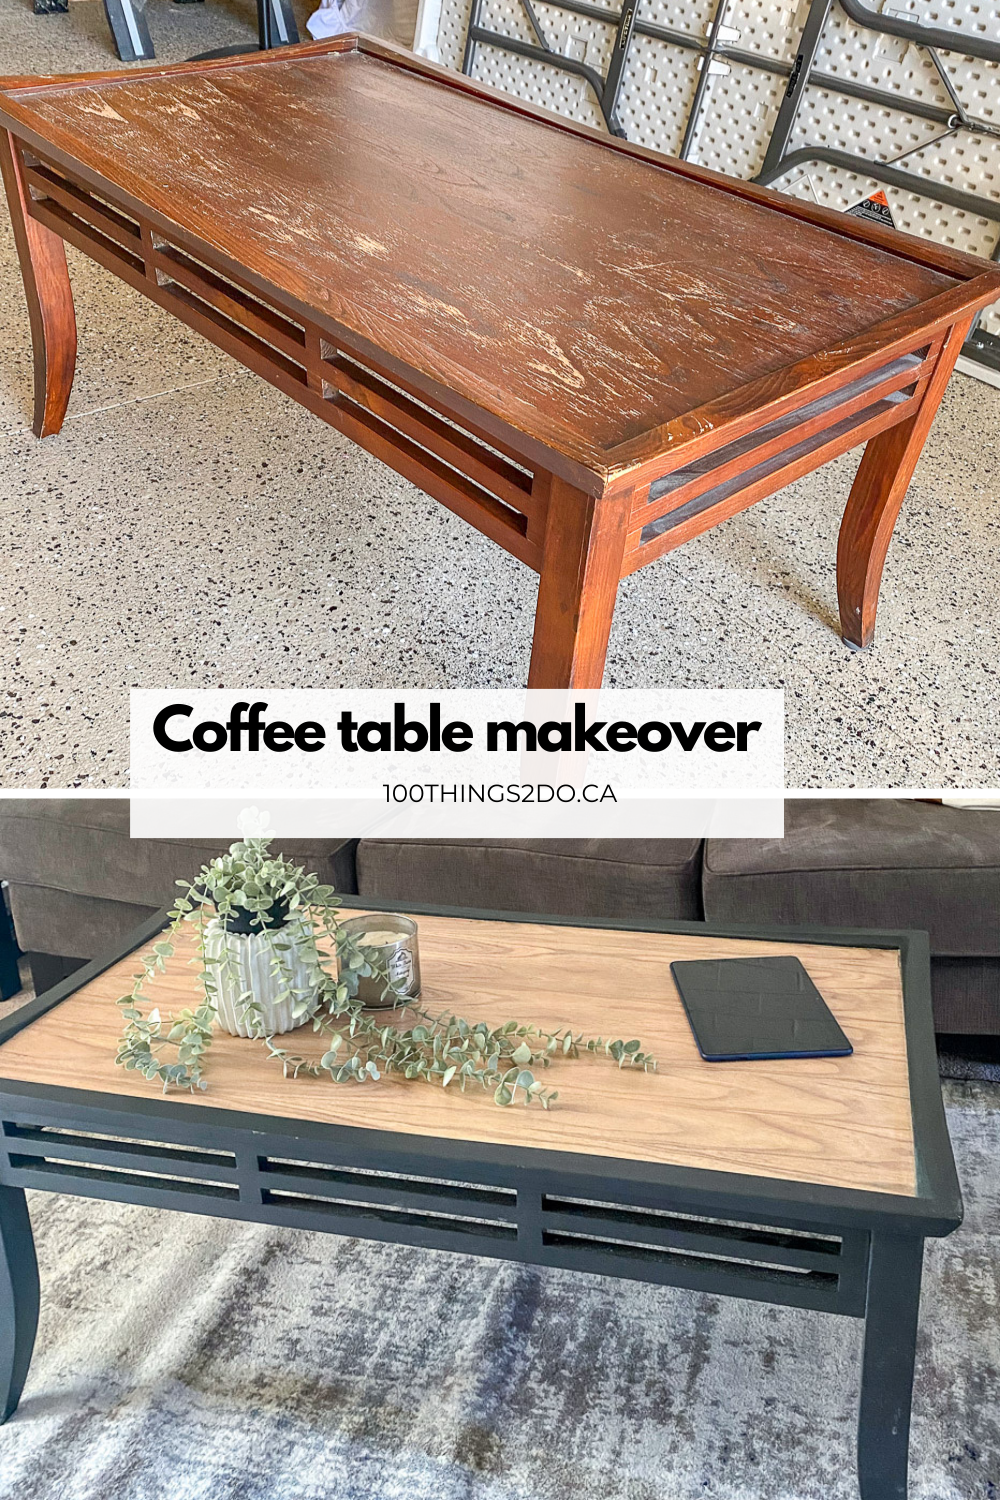 Upcycled coffee table, coffee table makeover, two-tone coffee table